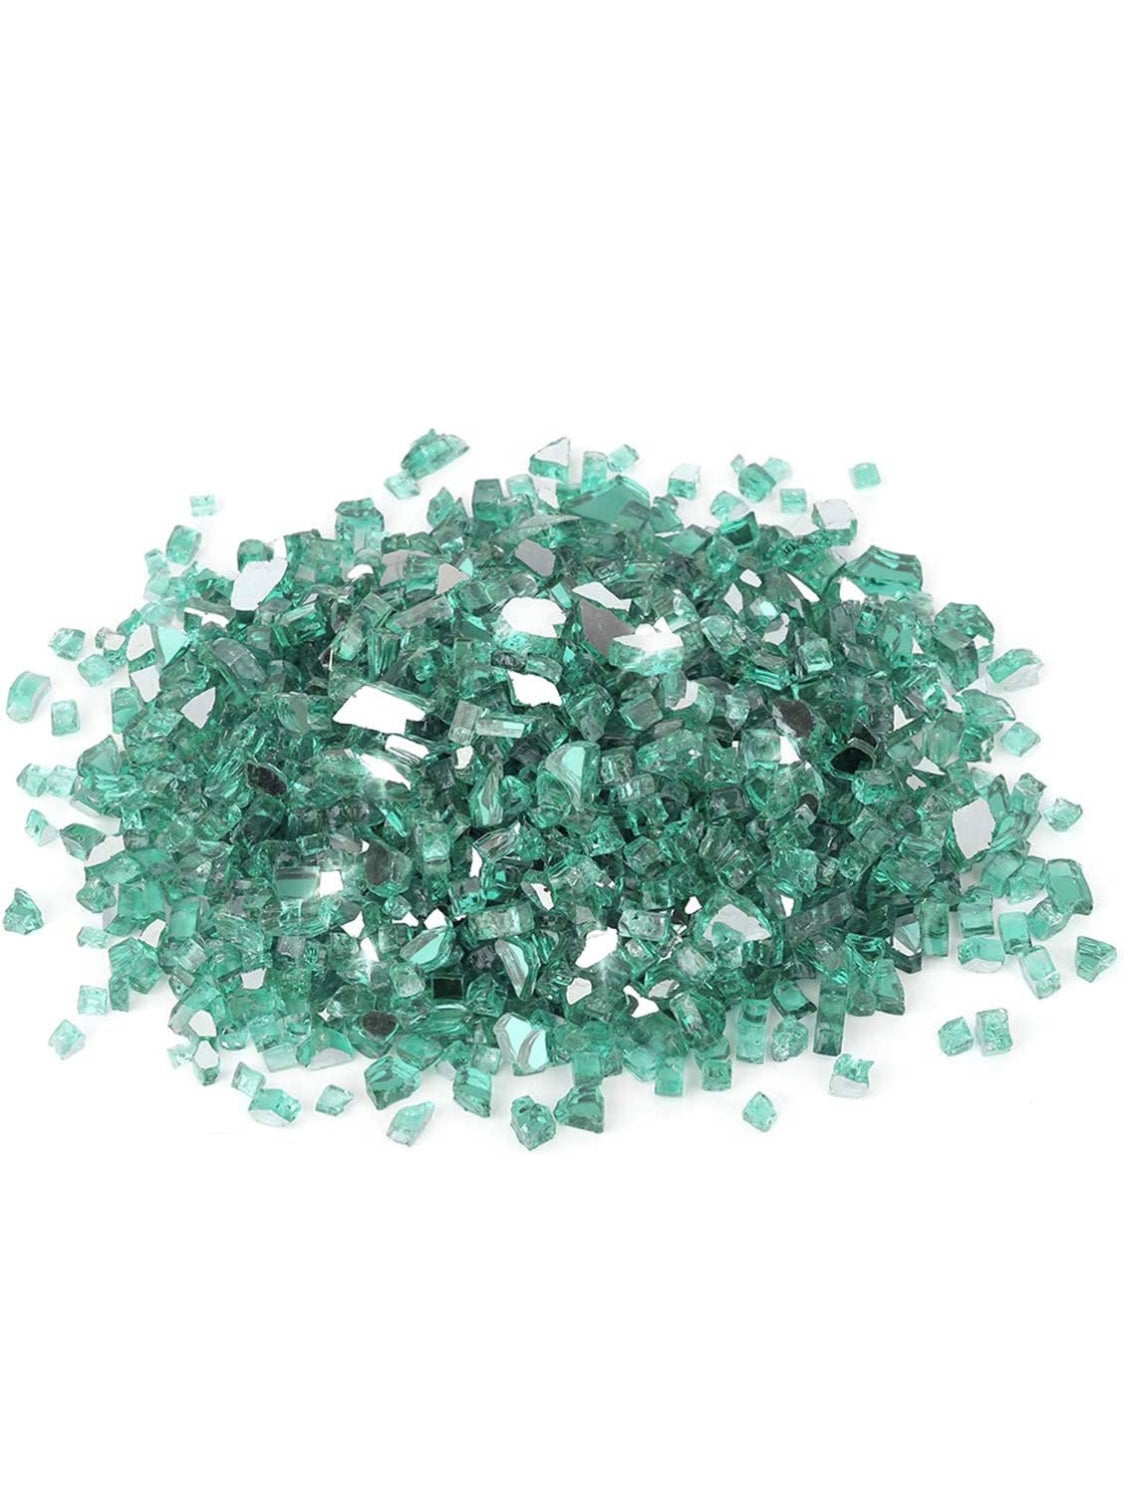 Crushed Glass Colors Assortment – Deep South Shelling